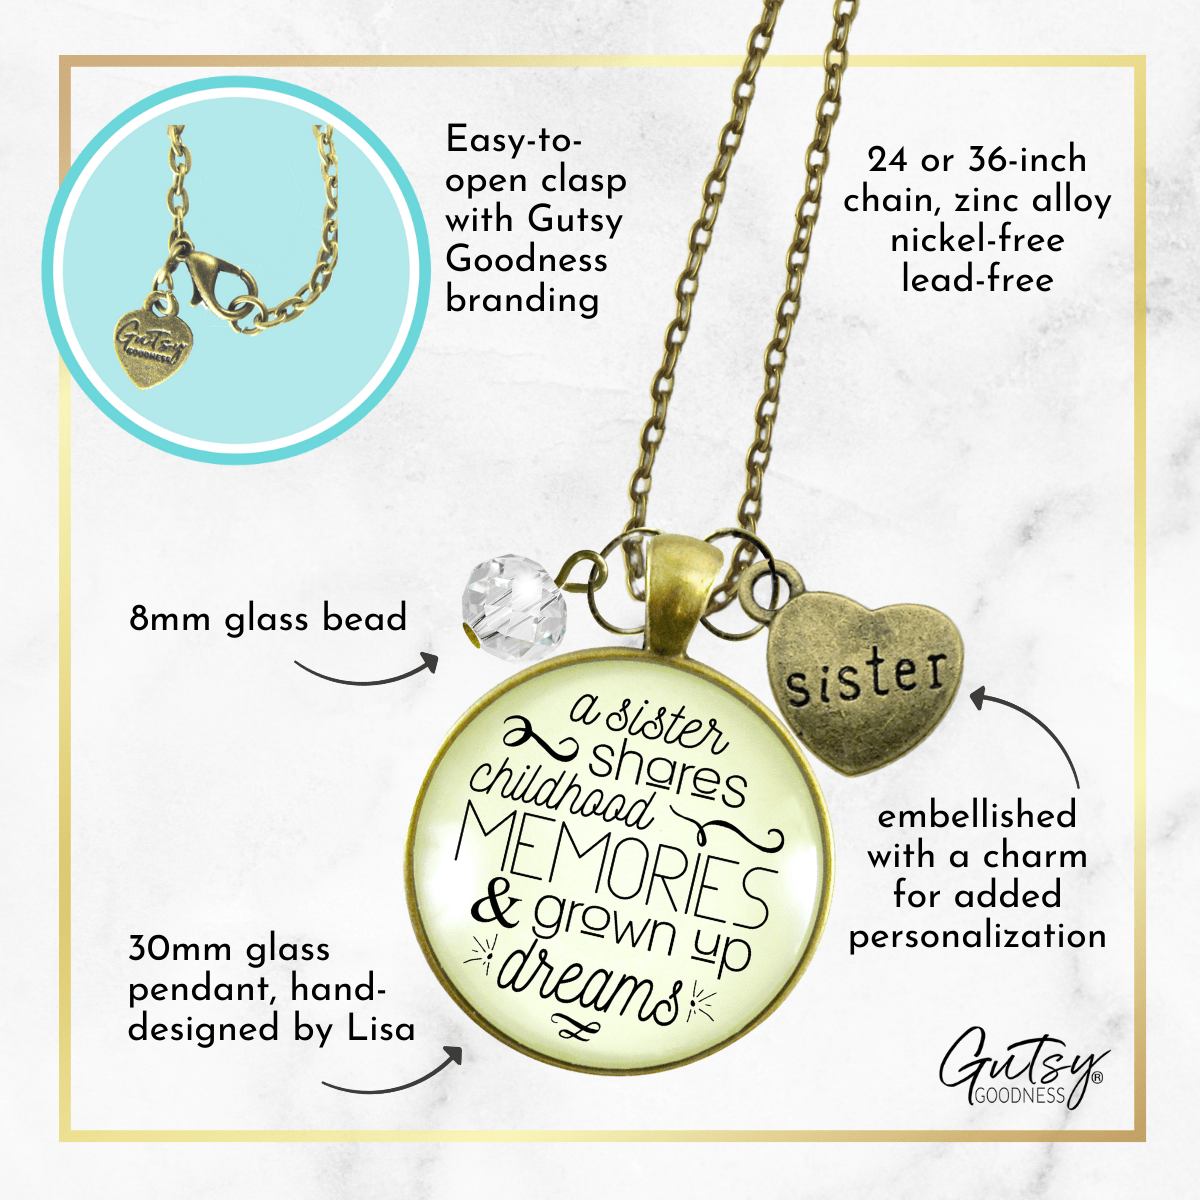 Gutsy Goodness Sisters Necklace Sister Shares Childhood Memories Meaningful Jewelry - Gutsy Goodness Handmade Jewelry;Sisters Necklace Sister Shares Childhood Memories Meaningful Jewelry - Gutsy Goodness Handmade Jewelry Gifts